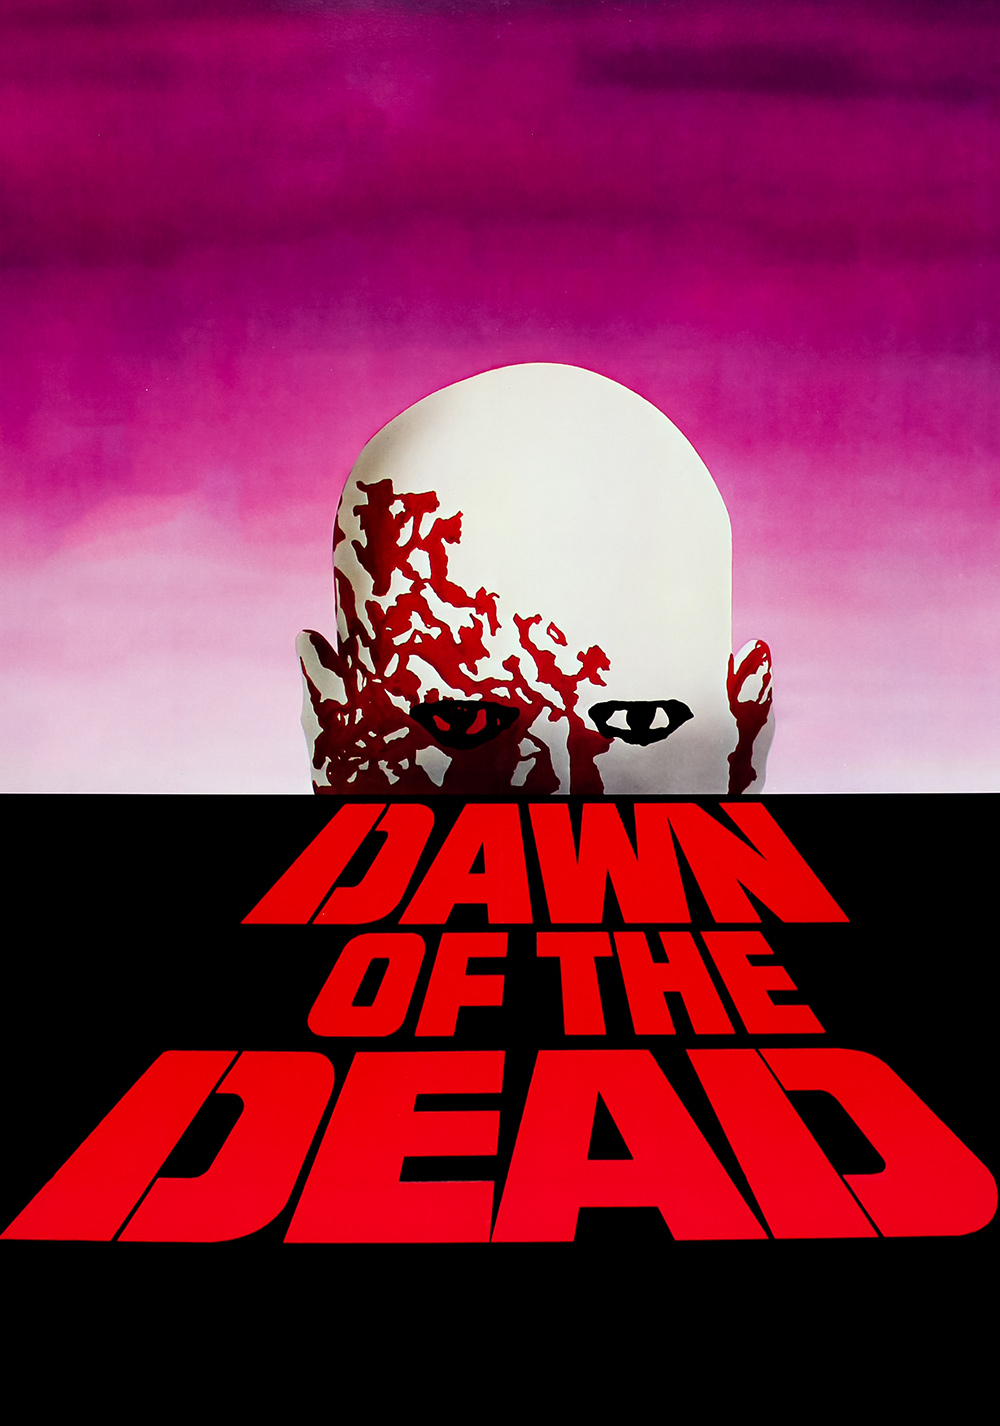 https://static.wikia.nocookie.net/listofdeaths/images/6/60/Dawn-of-the-Dead-Poster.jpg/revision/latest?cb=20201129140041